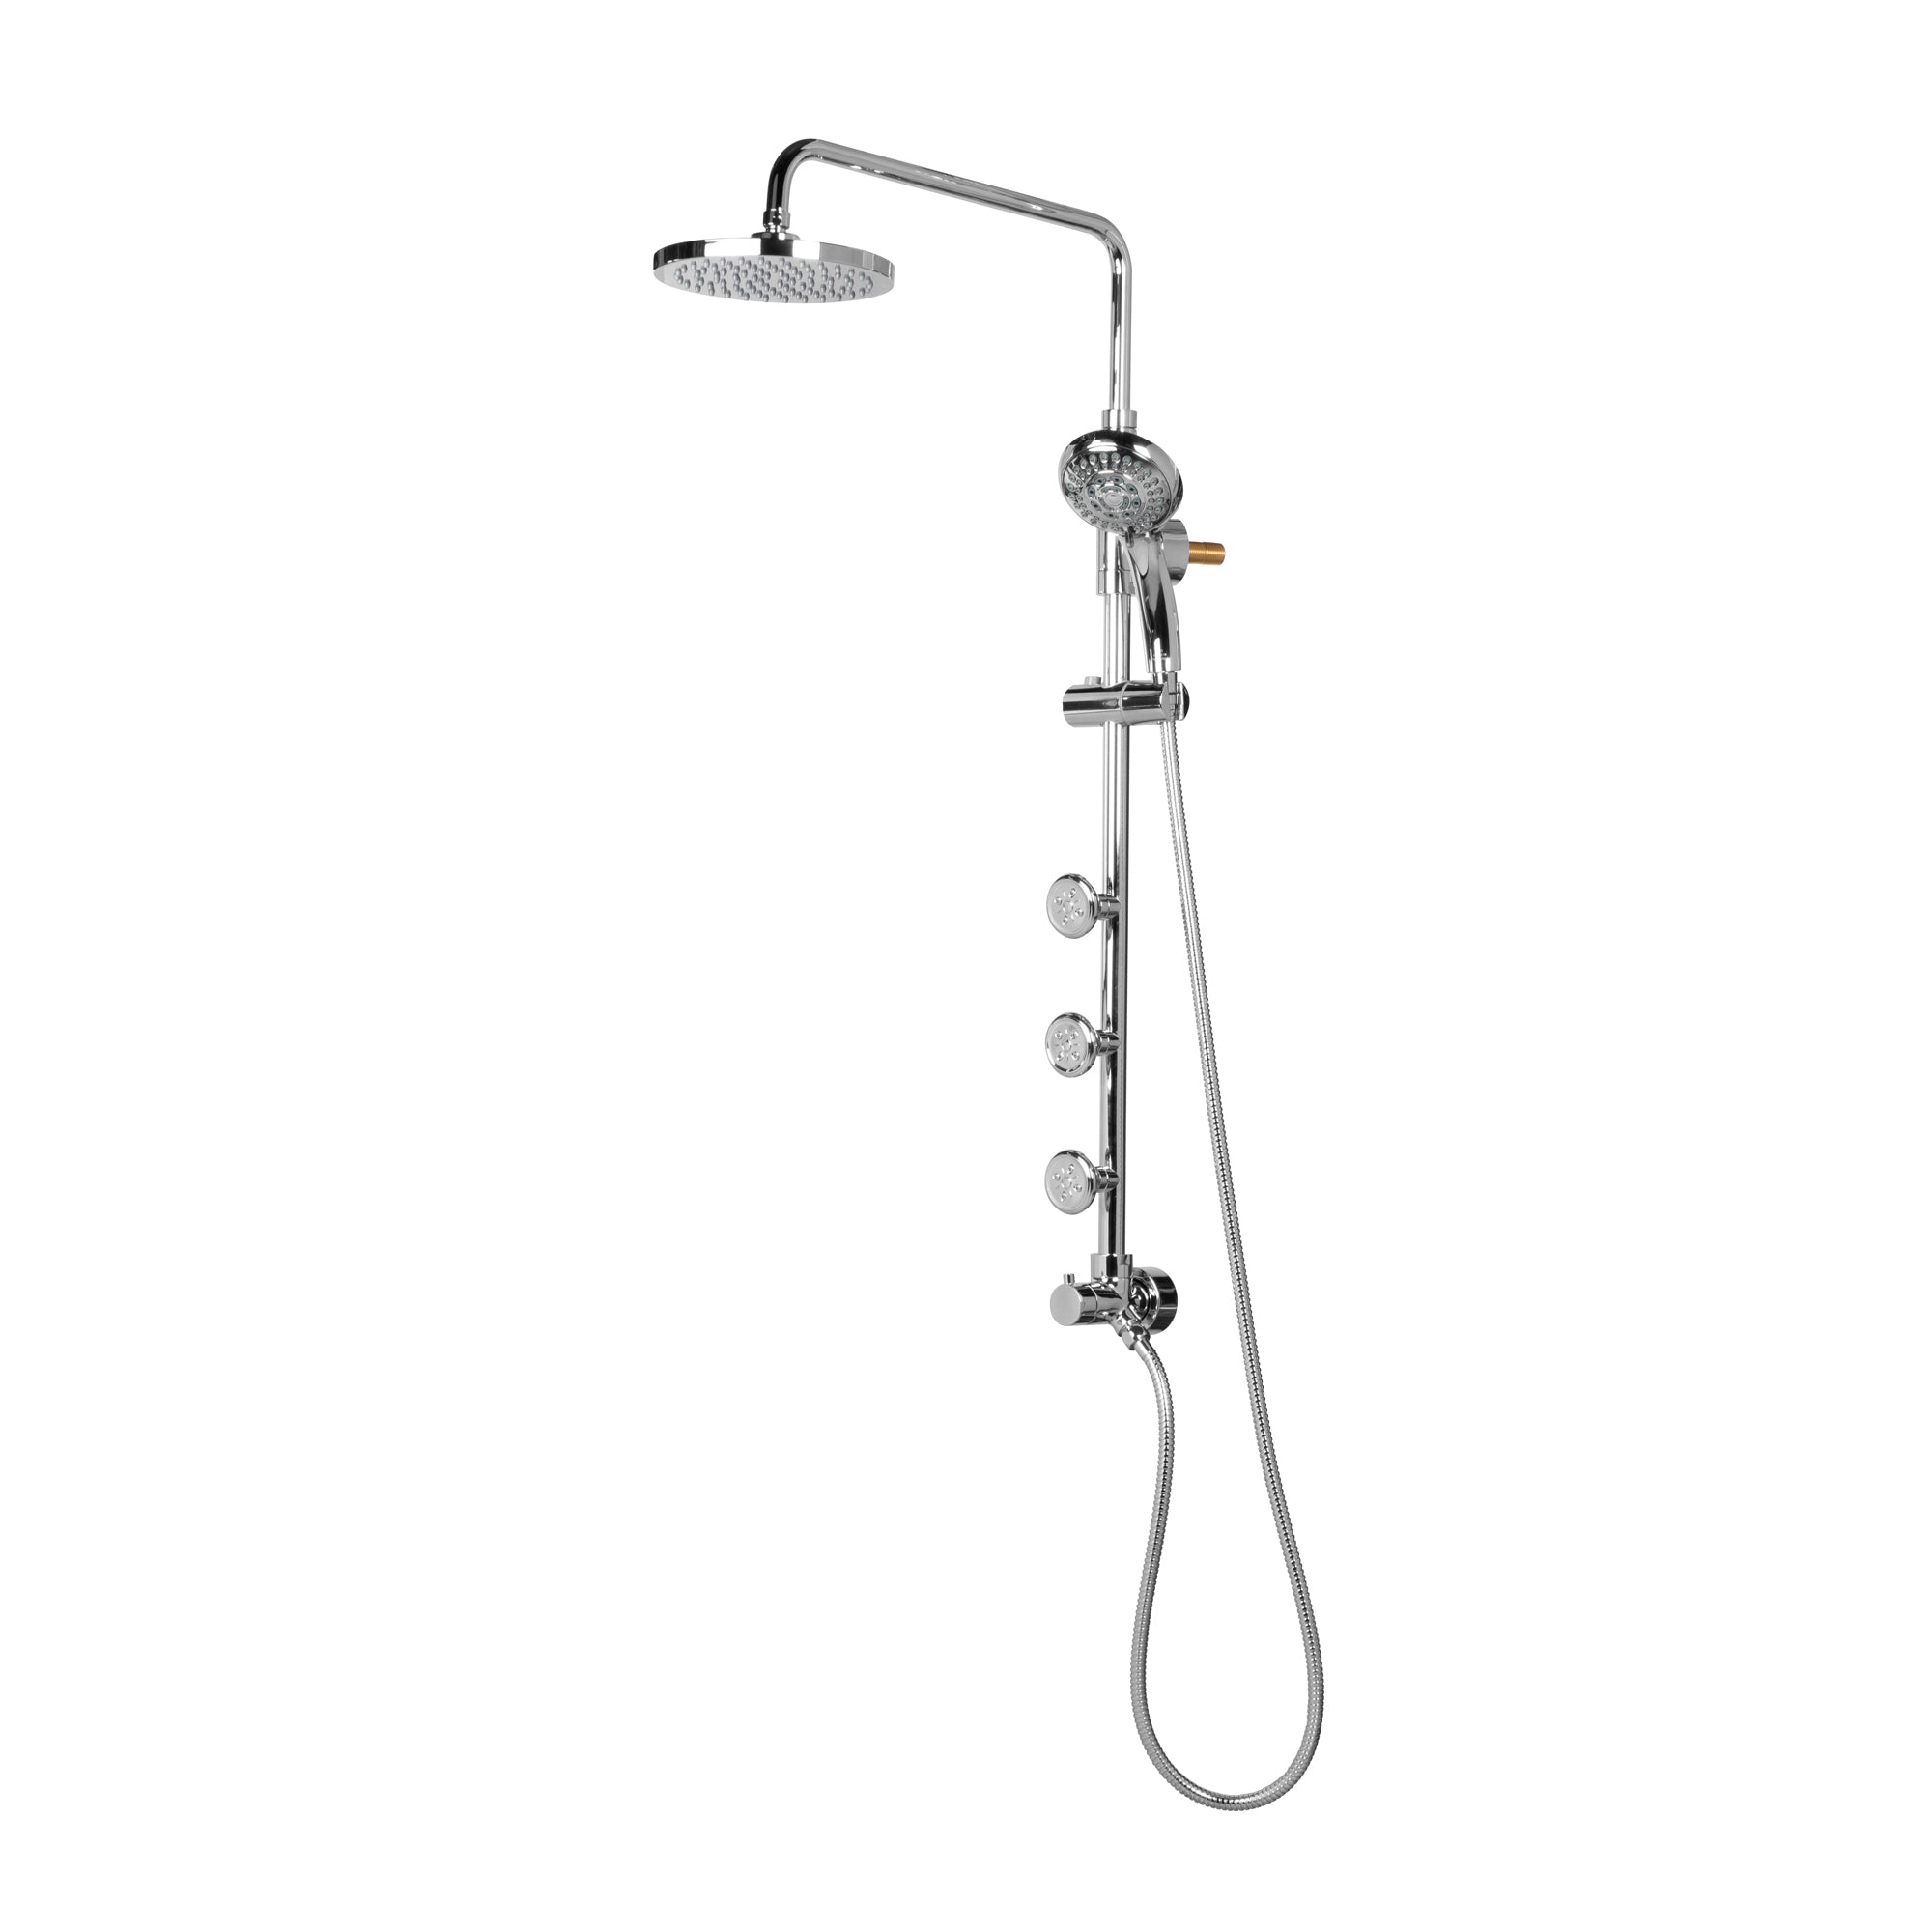 PULSE ShowerSpas Shower System - Lanikai ShowerSpa - with 8" Rain showerhead with soft tips, Five-function hand shower with 59" double-interlocking stainless steel hose, 3 dual-function body jets and diverter - Polished Chrome - 1028 - Vital Hydrotherapy